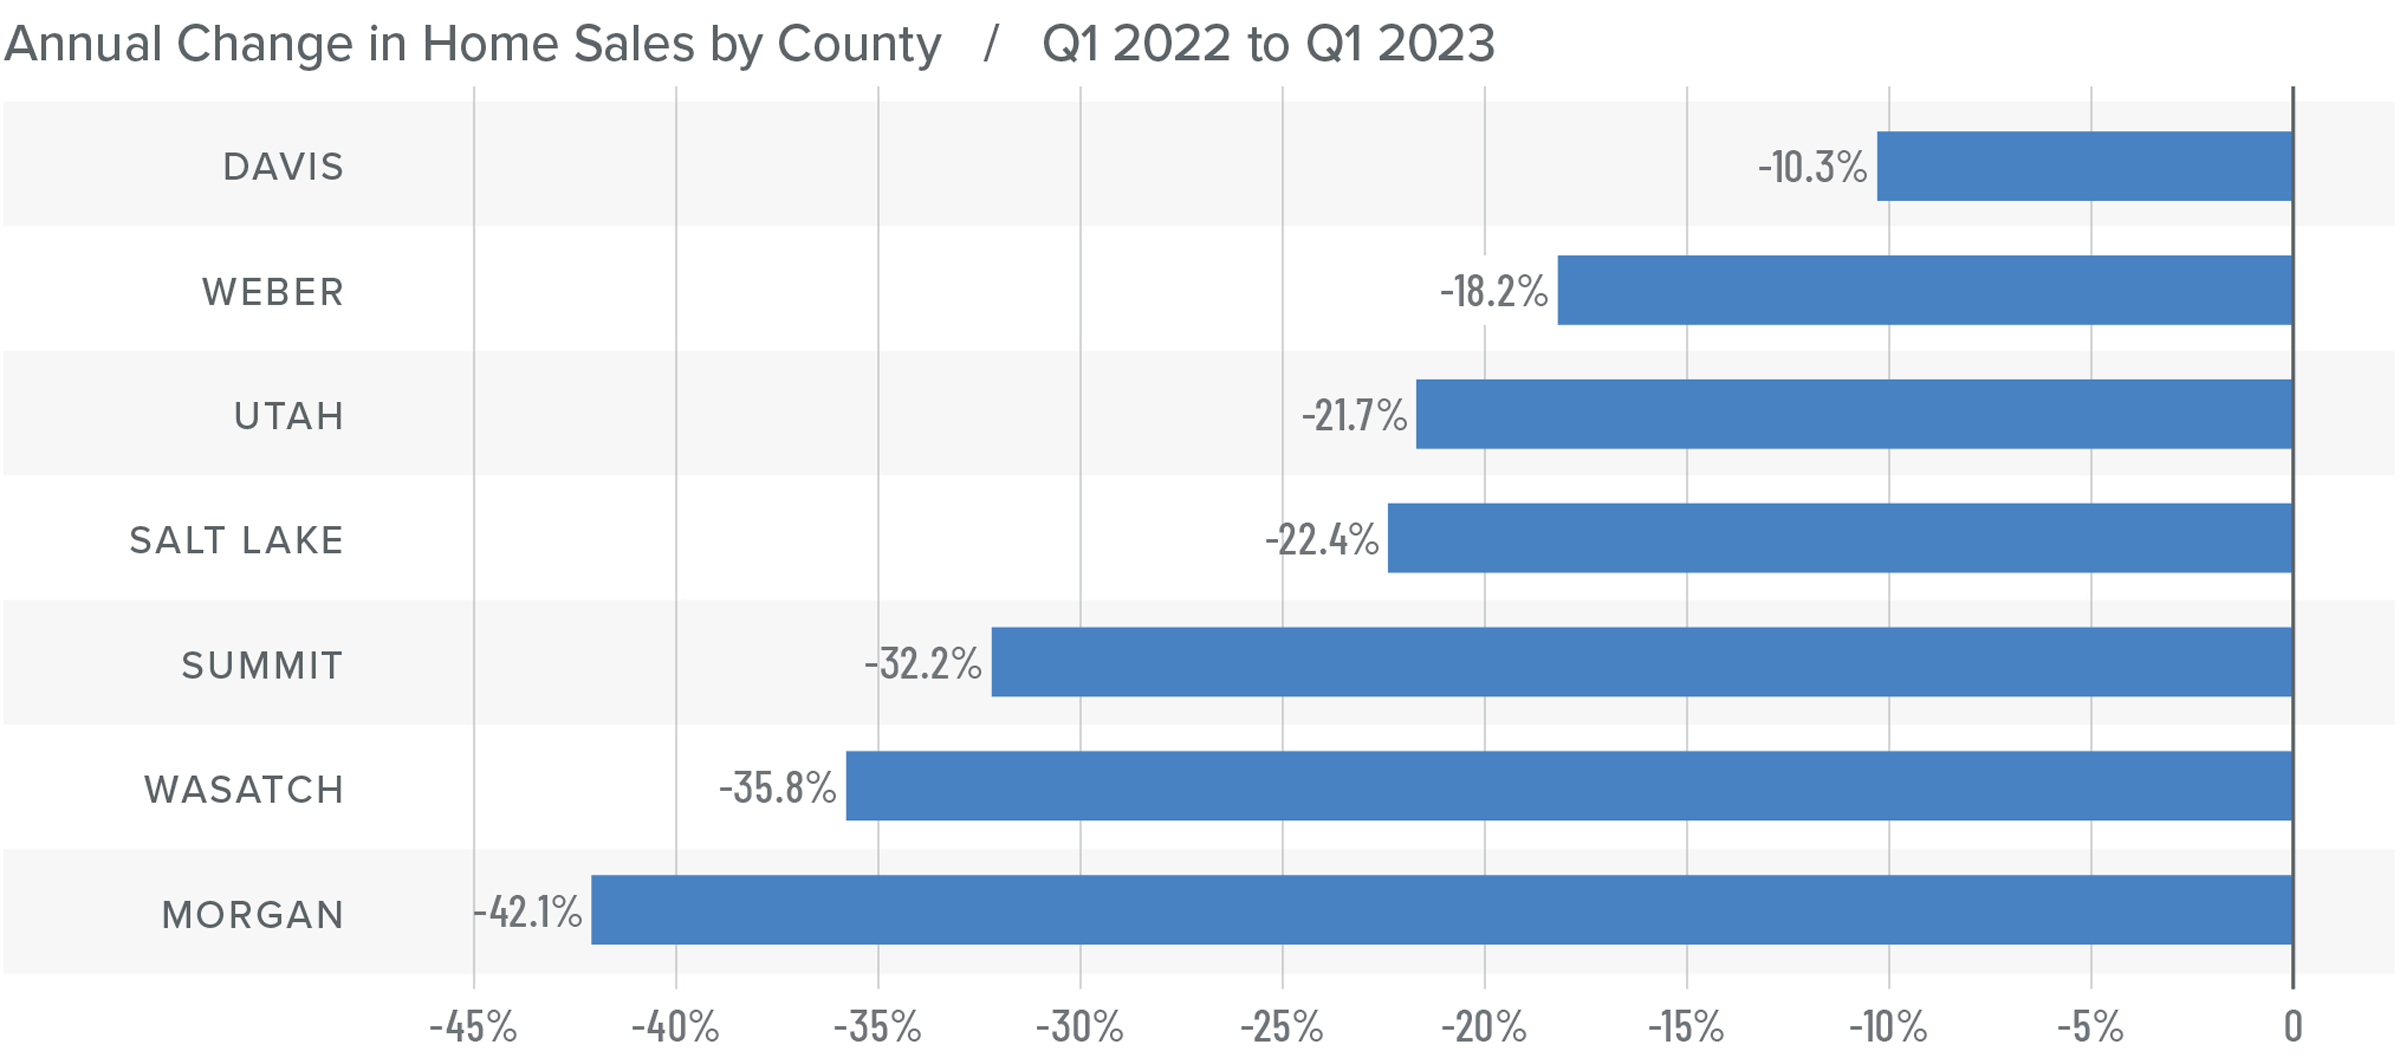 A bar graph showing the annual change in home sales for various counties in Utah from Q1 2022 to Q1 2023. All counties have a negative percentage year-over-year change. Here are the totals: Davis at -10.3%, Weber at -18.2%, Utah -21.7%, Salt Lake -22.4%, Summit -32.2%, Wasatch -35.8%, and Morgan -42.1%.